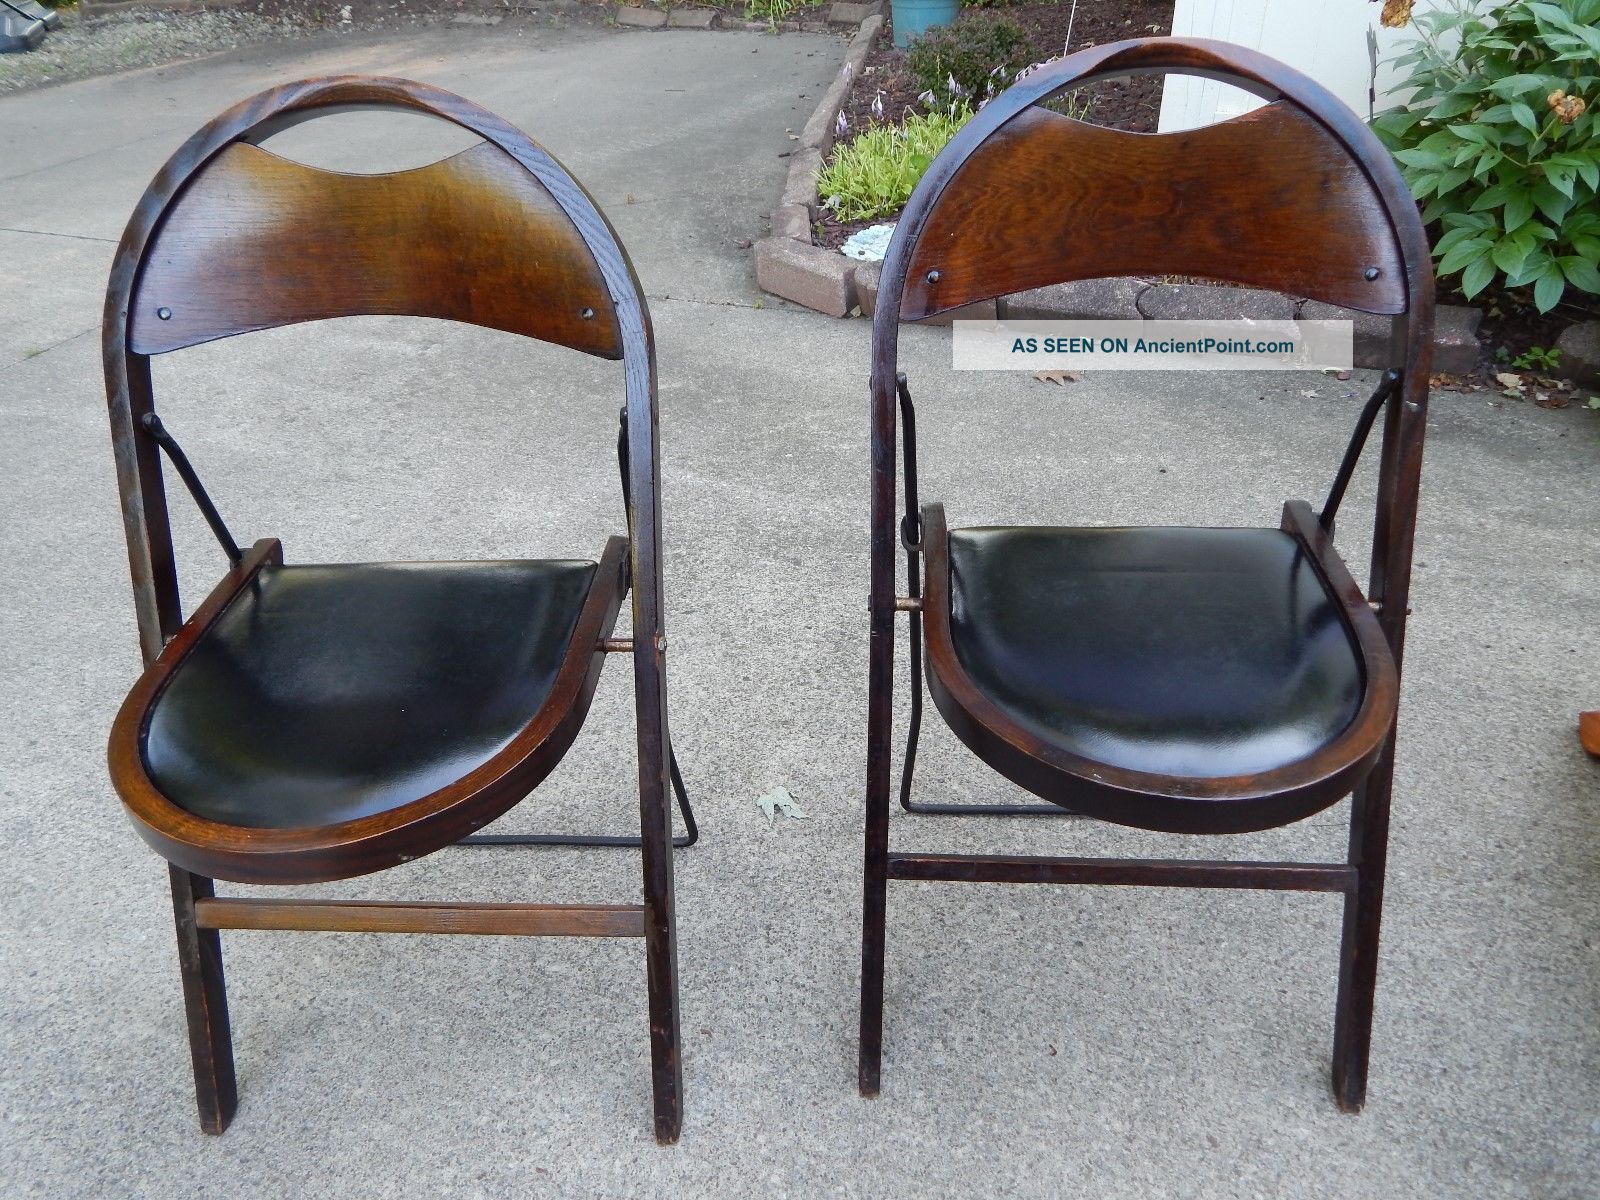 Two Vintage 20s/30s Deco Industrial Stakmore Wood Folding Chairs Leather Seats 1900-1950 photo